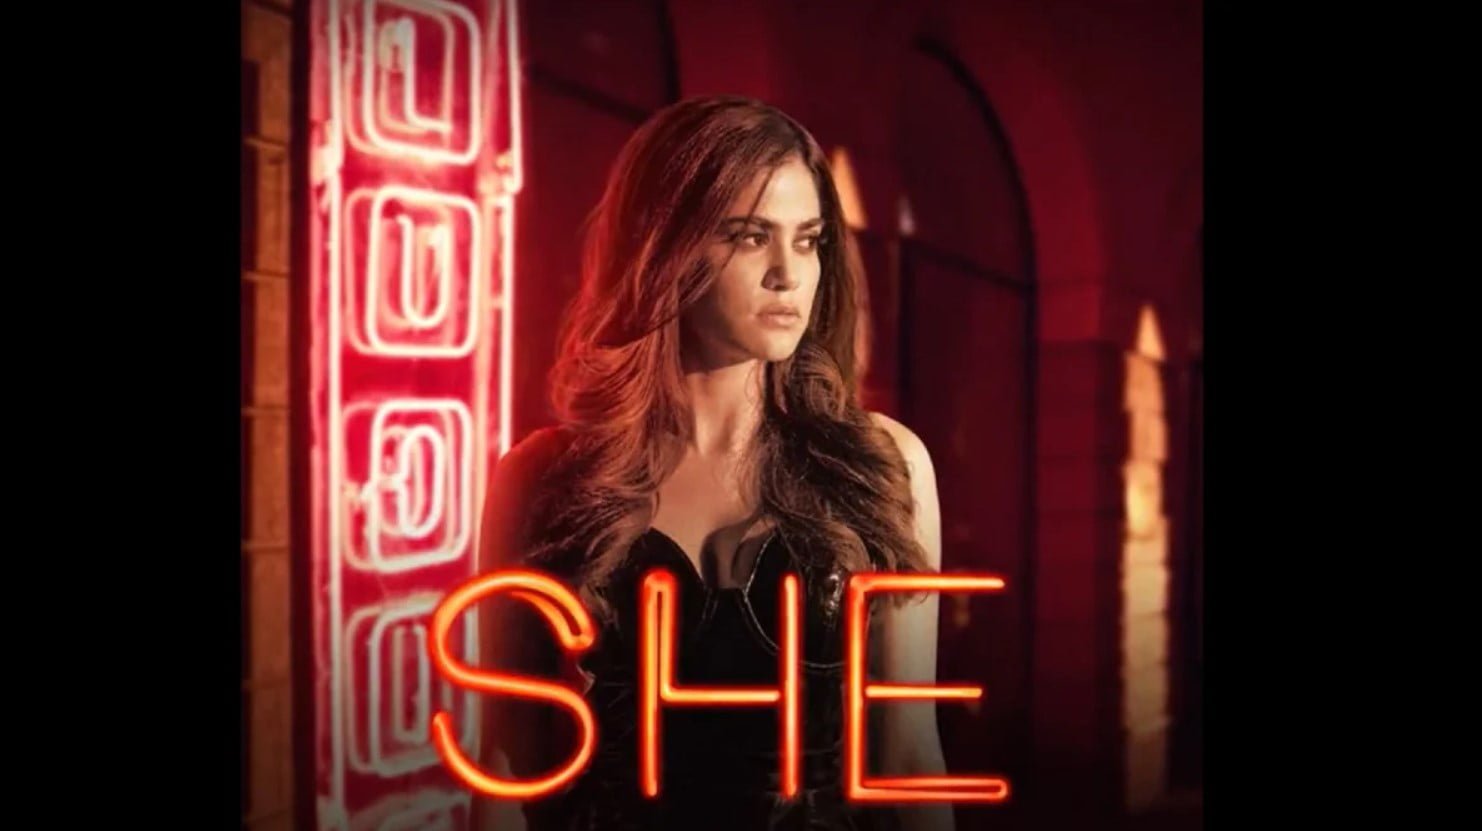 She Season 2 Release Date, Story, Trailer and Where to Stream